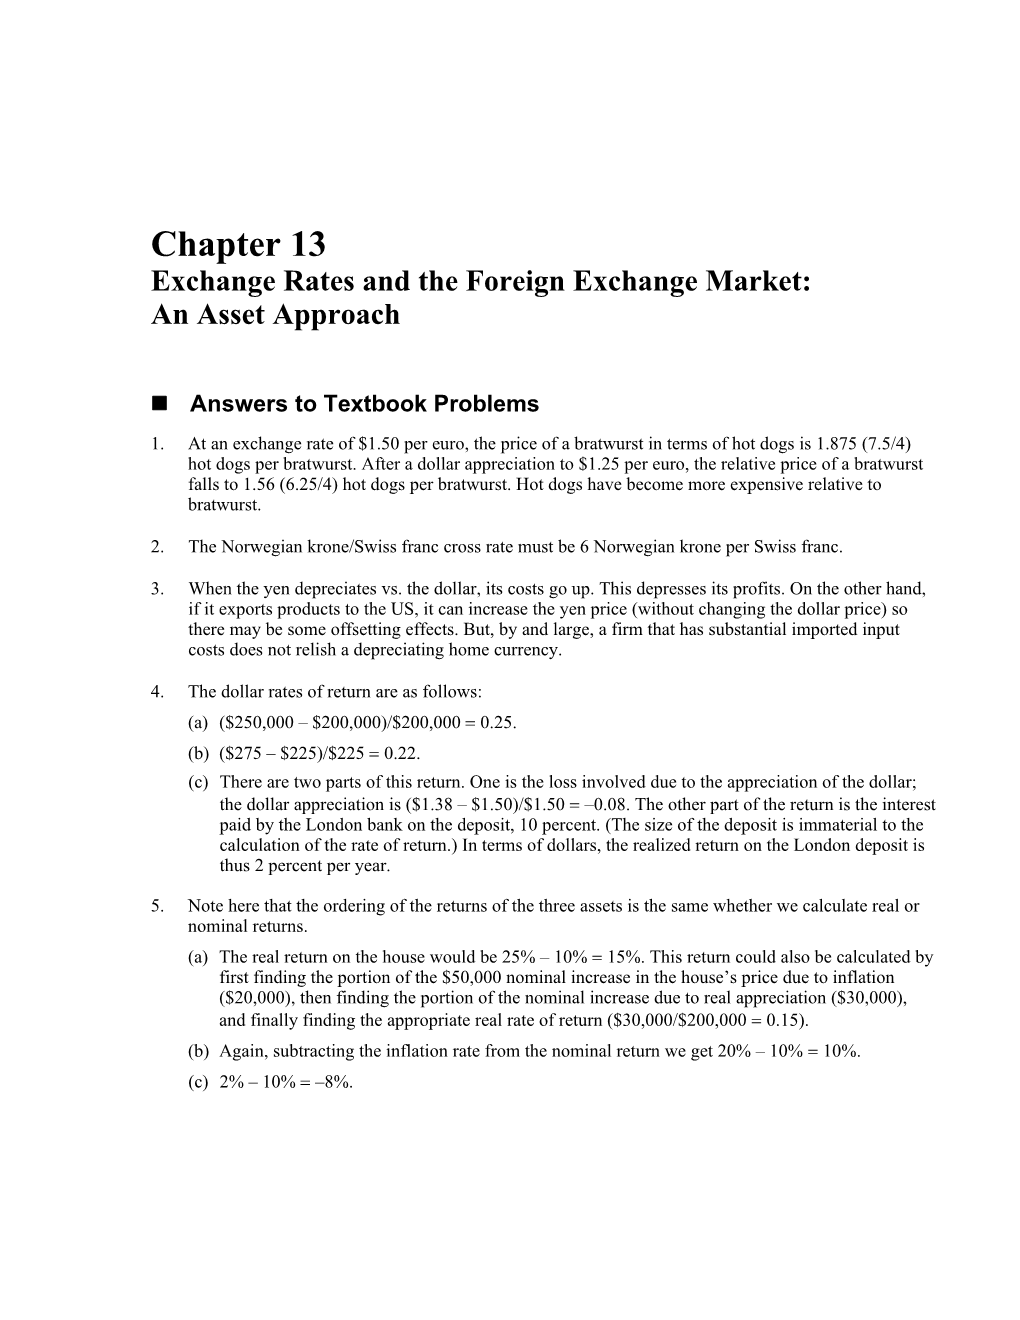 Chapter 13 Exchange Rates and the Foreign Exchange Market: an Asset Approach 1